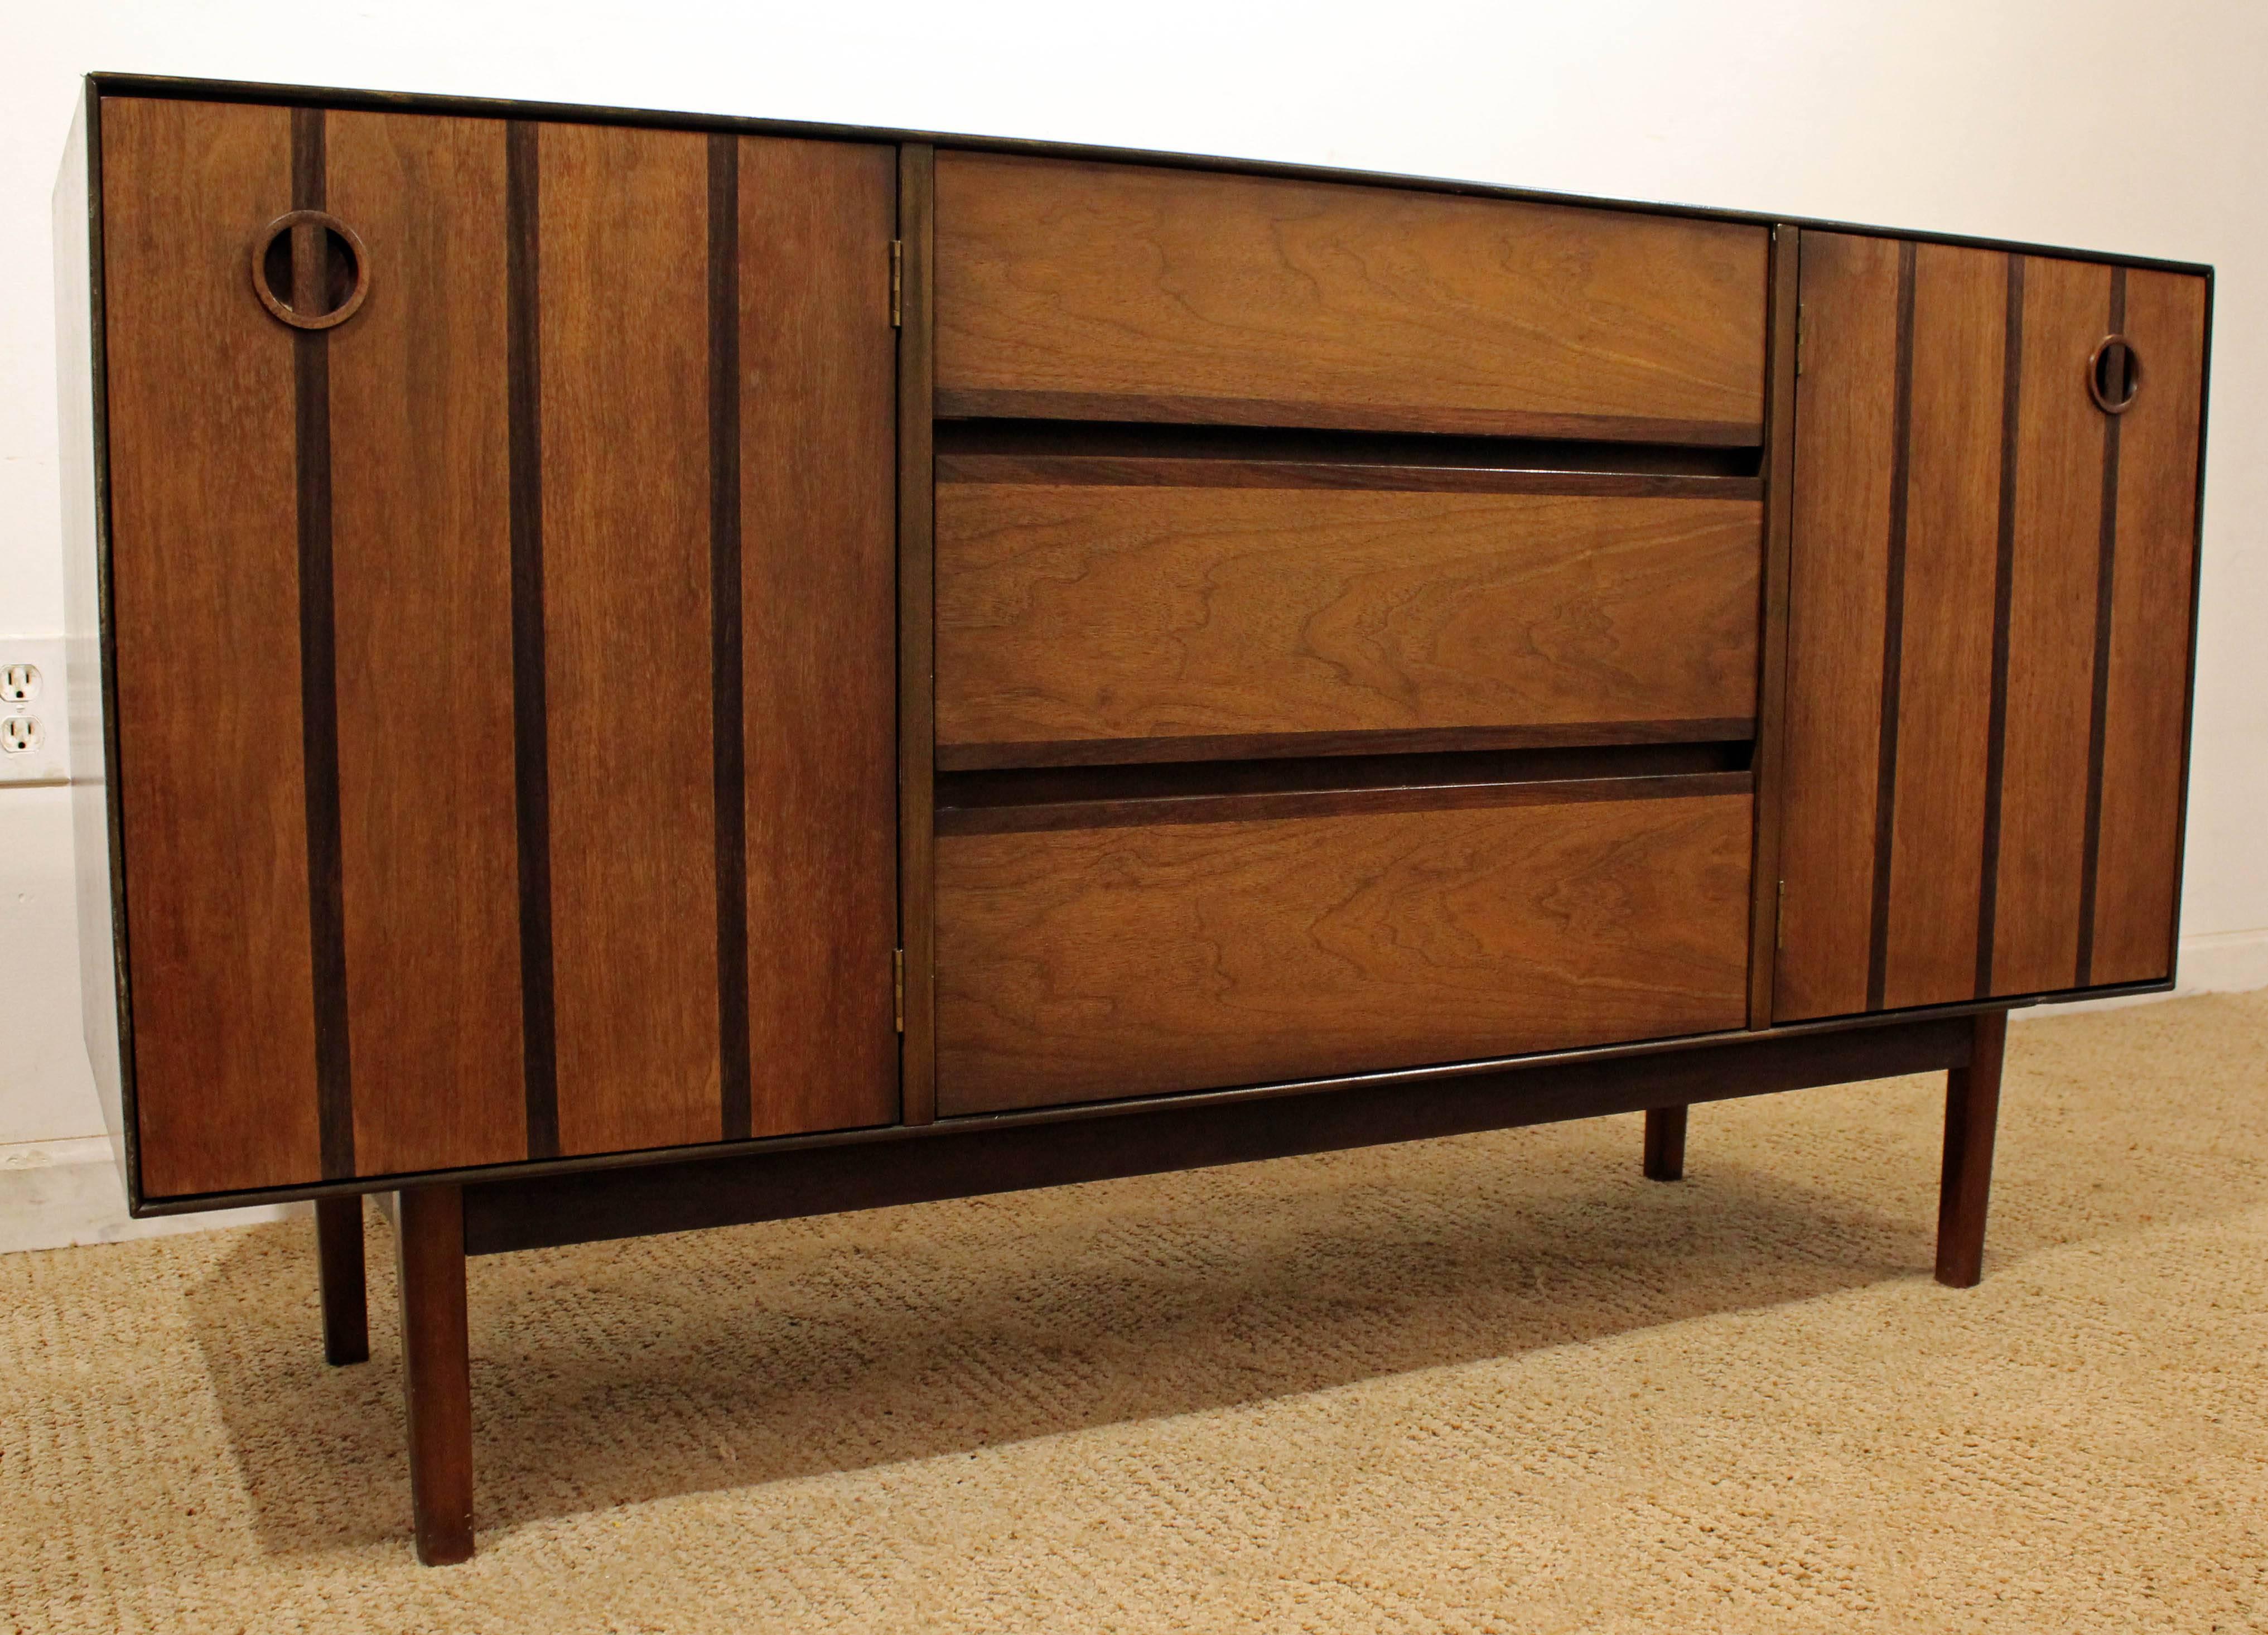 Offered is a Mid-Century Modern credenza, designed by H. Paul Browning for Stanley's 